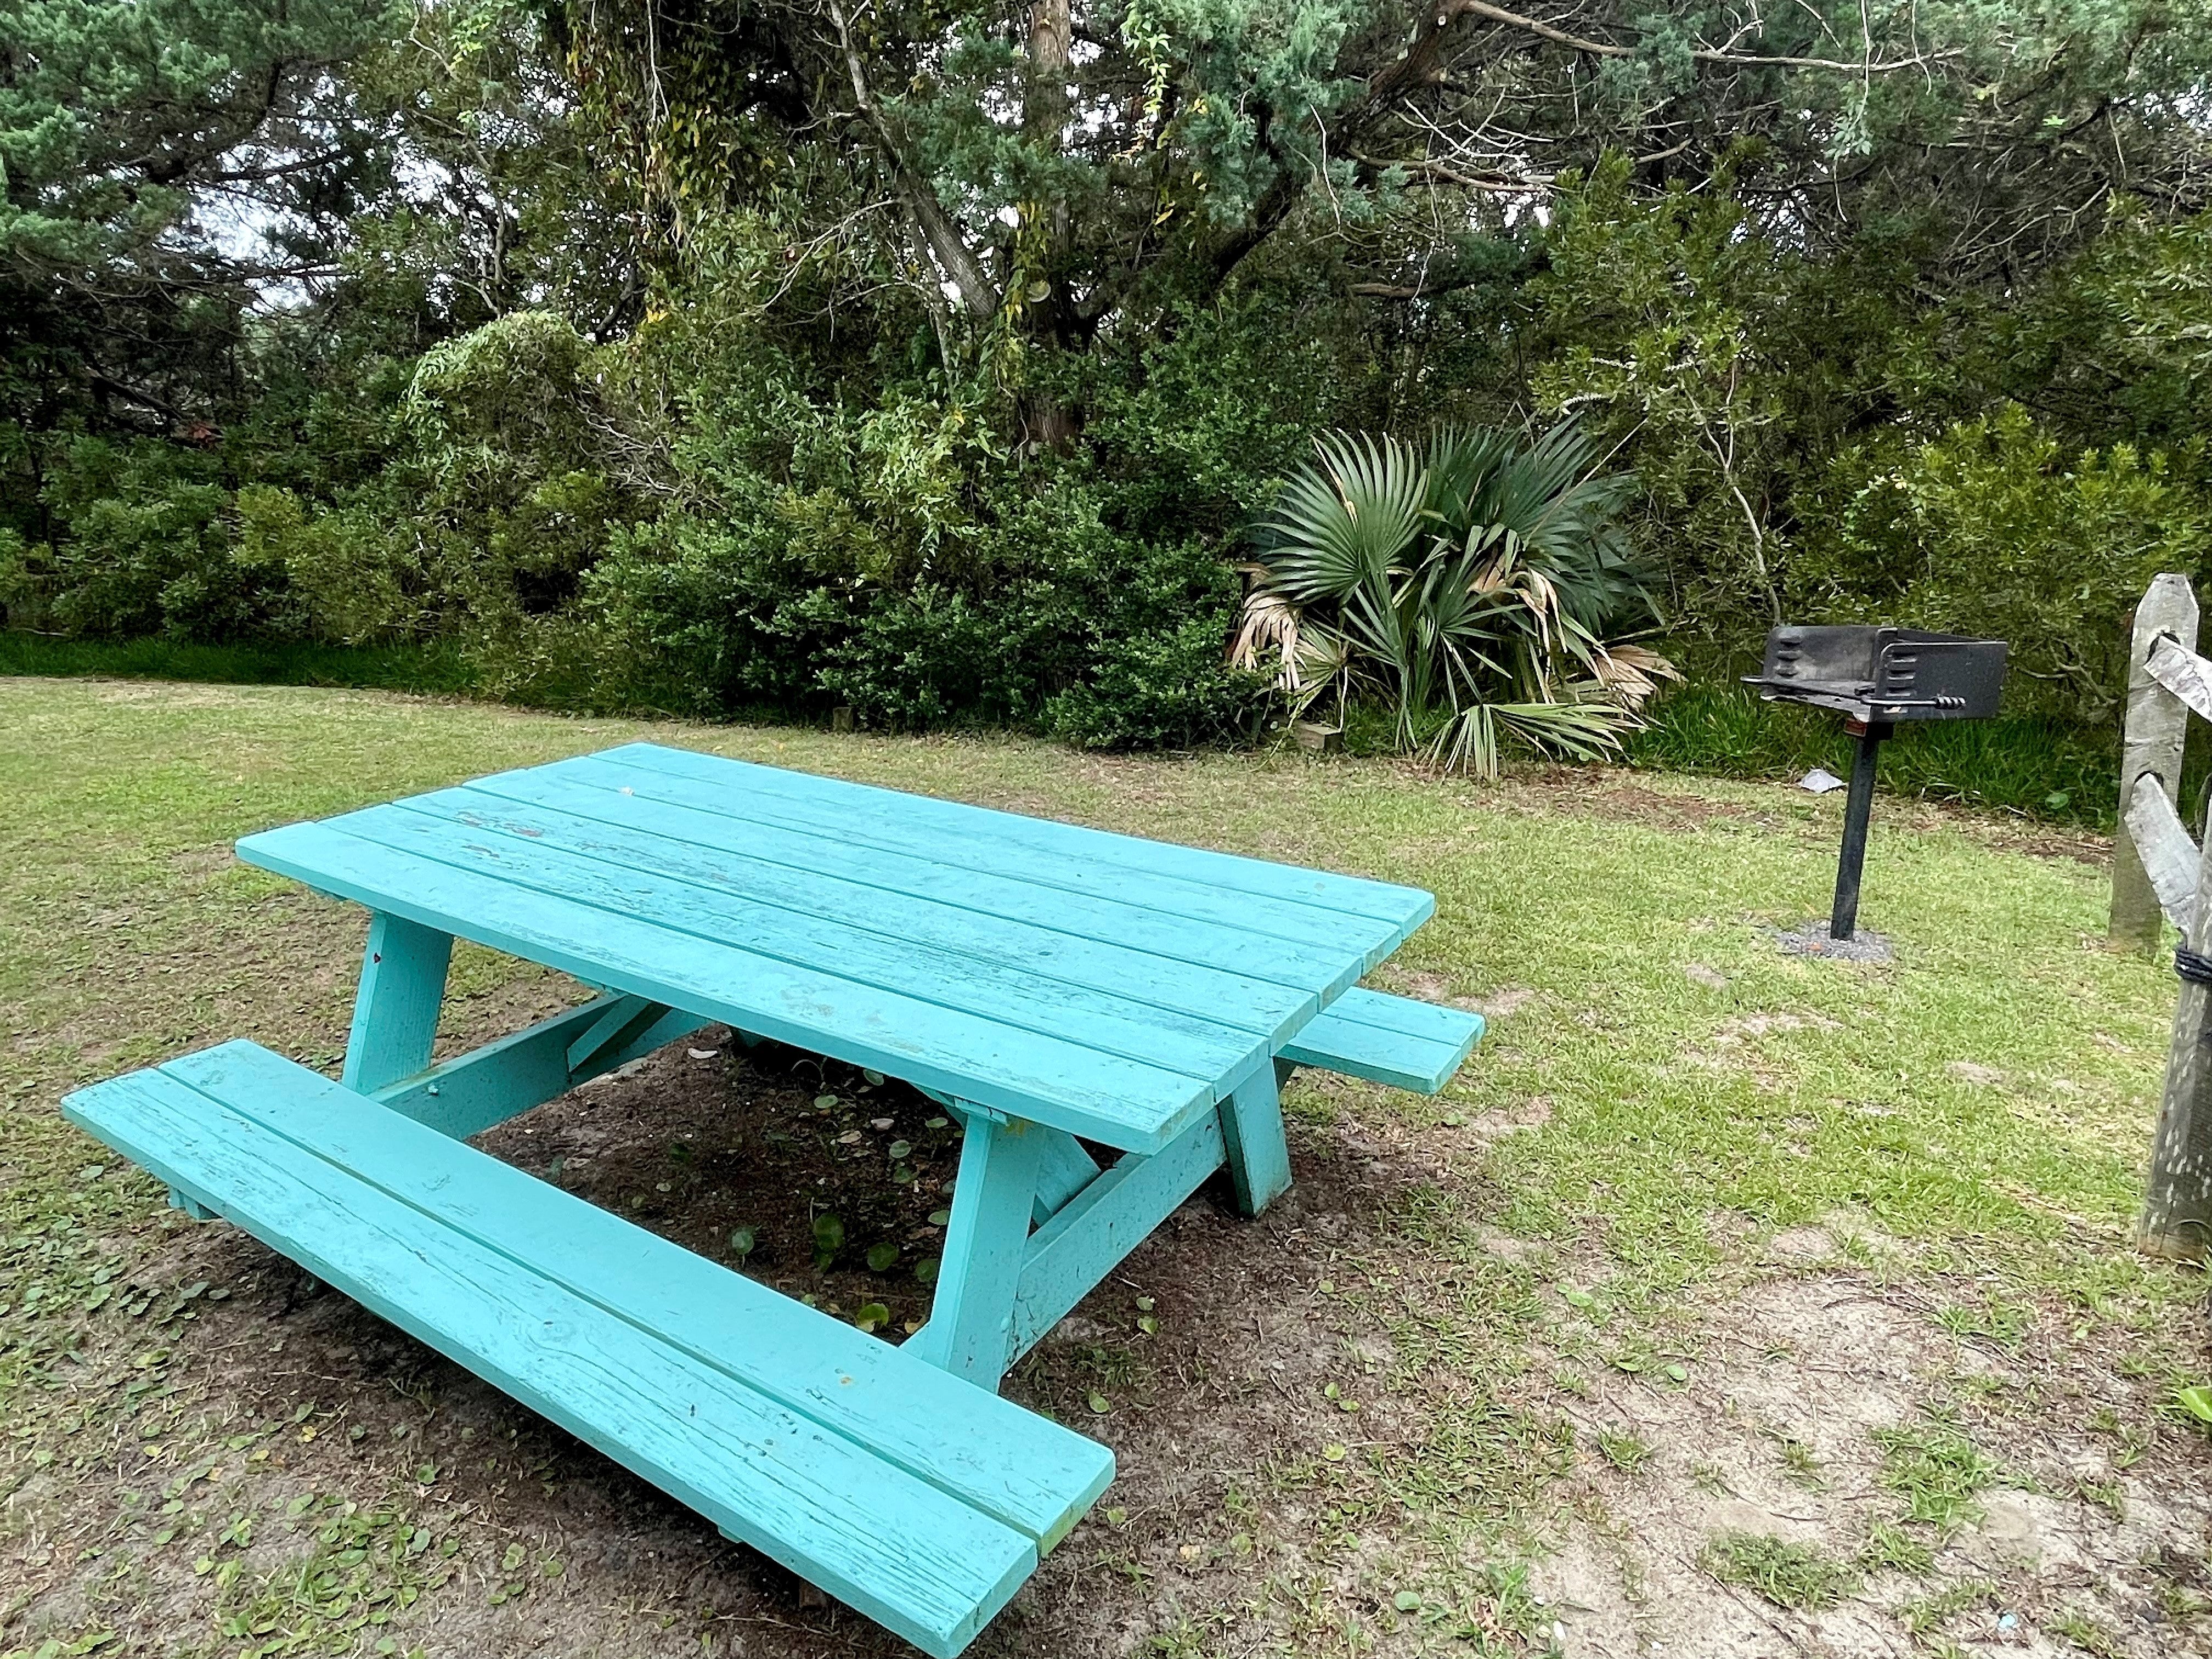 Park Style Grill and Picnic Area